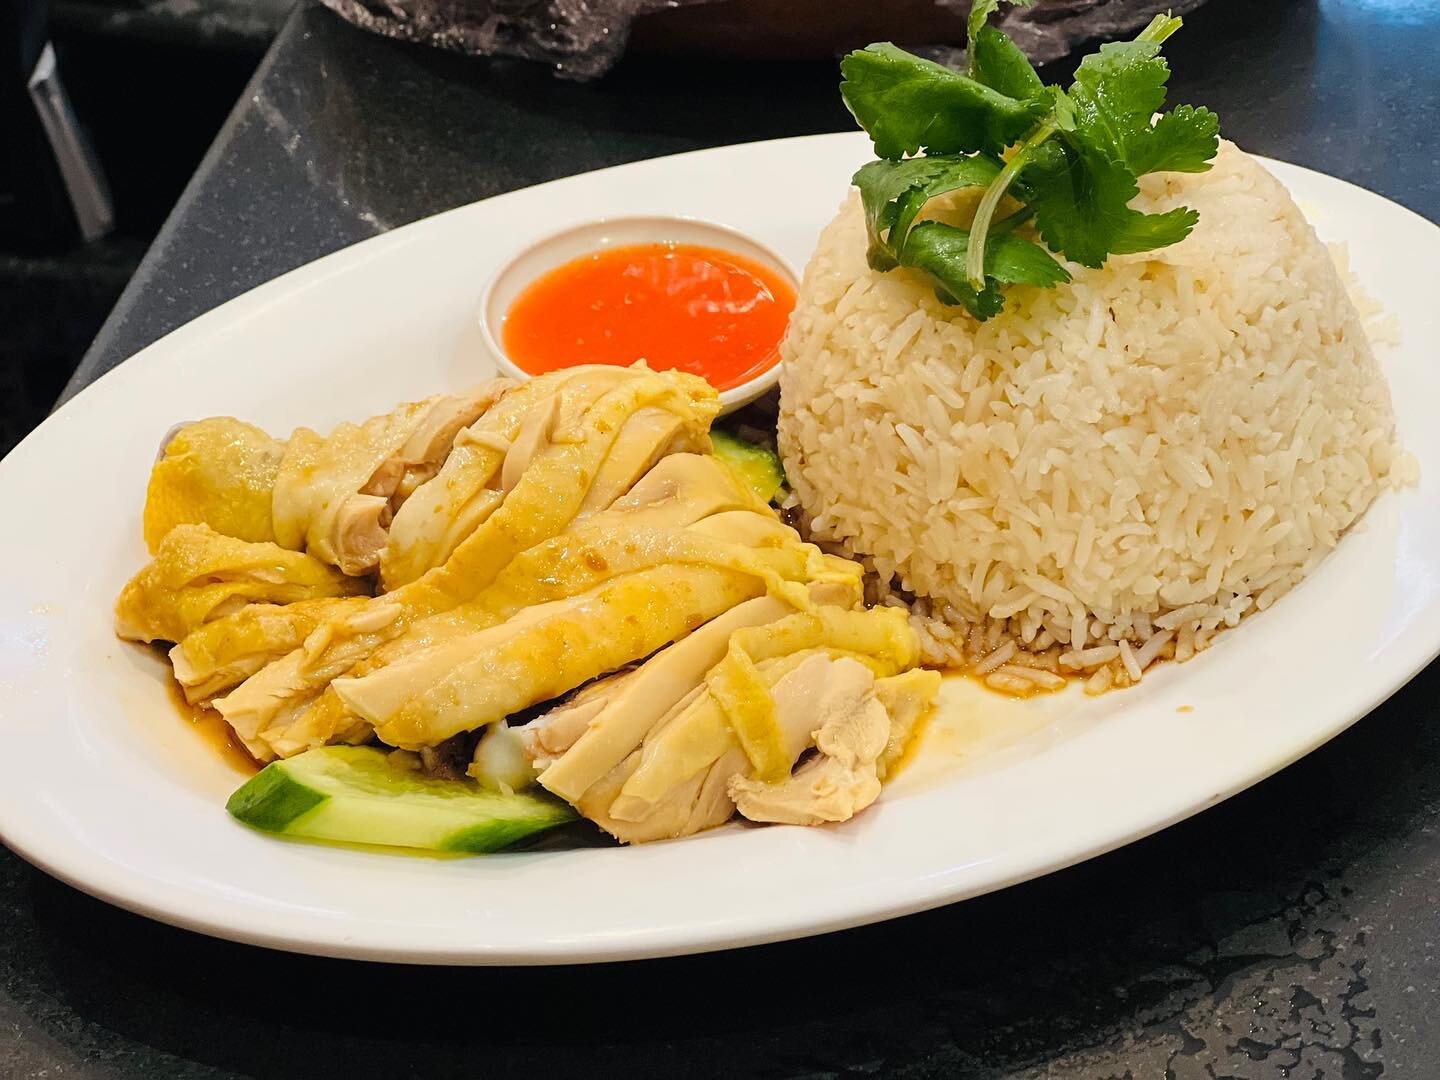 Hainanese Chicken Rice. 
Are you Team Drumstick Thigh 🍗 or Team Breast? 🐓
Poached chicken served on a bed of cucumber with a side of fragrant rice.
(45 on the menu)